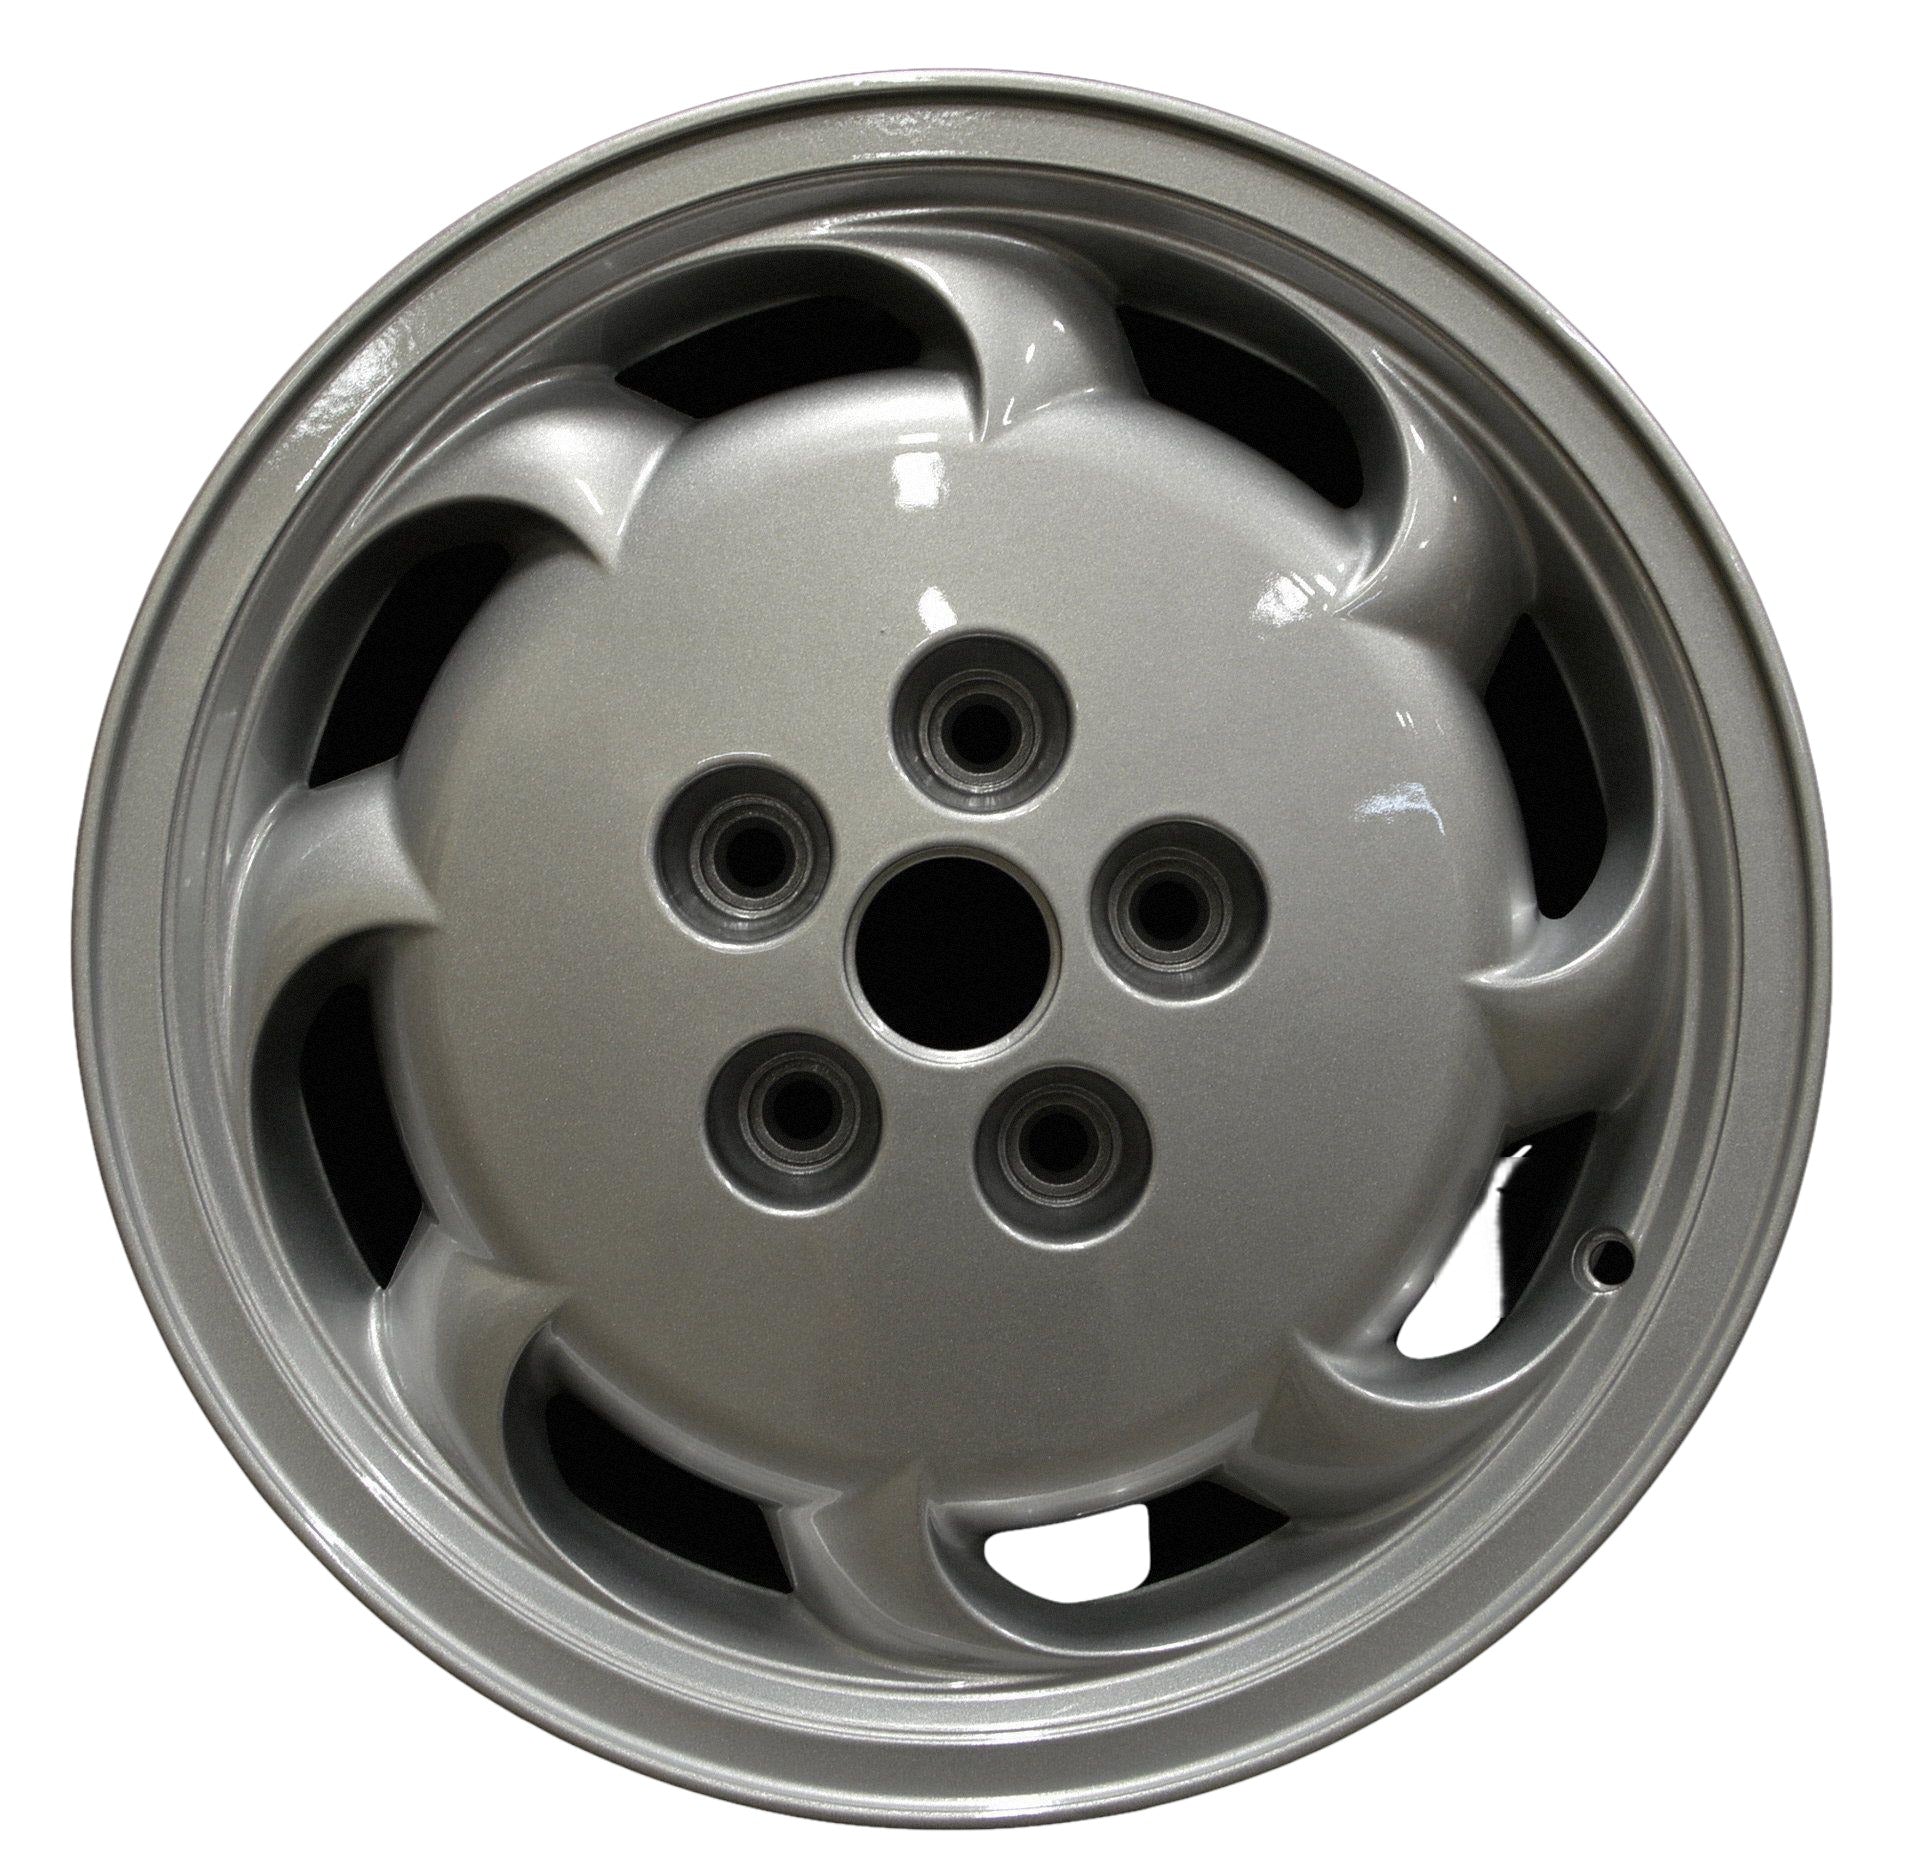 Oldsmobile LSS  1992, 1993, 1994, 1995, 1996, 1997, 1998, 1999 Factory OEM Car Wheel Size 16x7 Alloy WAO.6007.PS02.FF